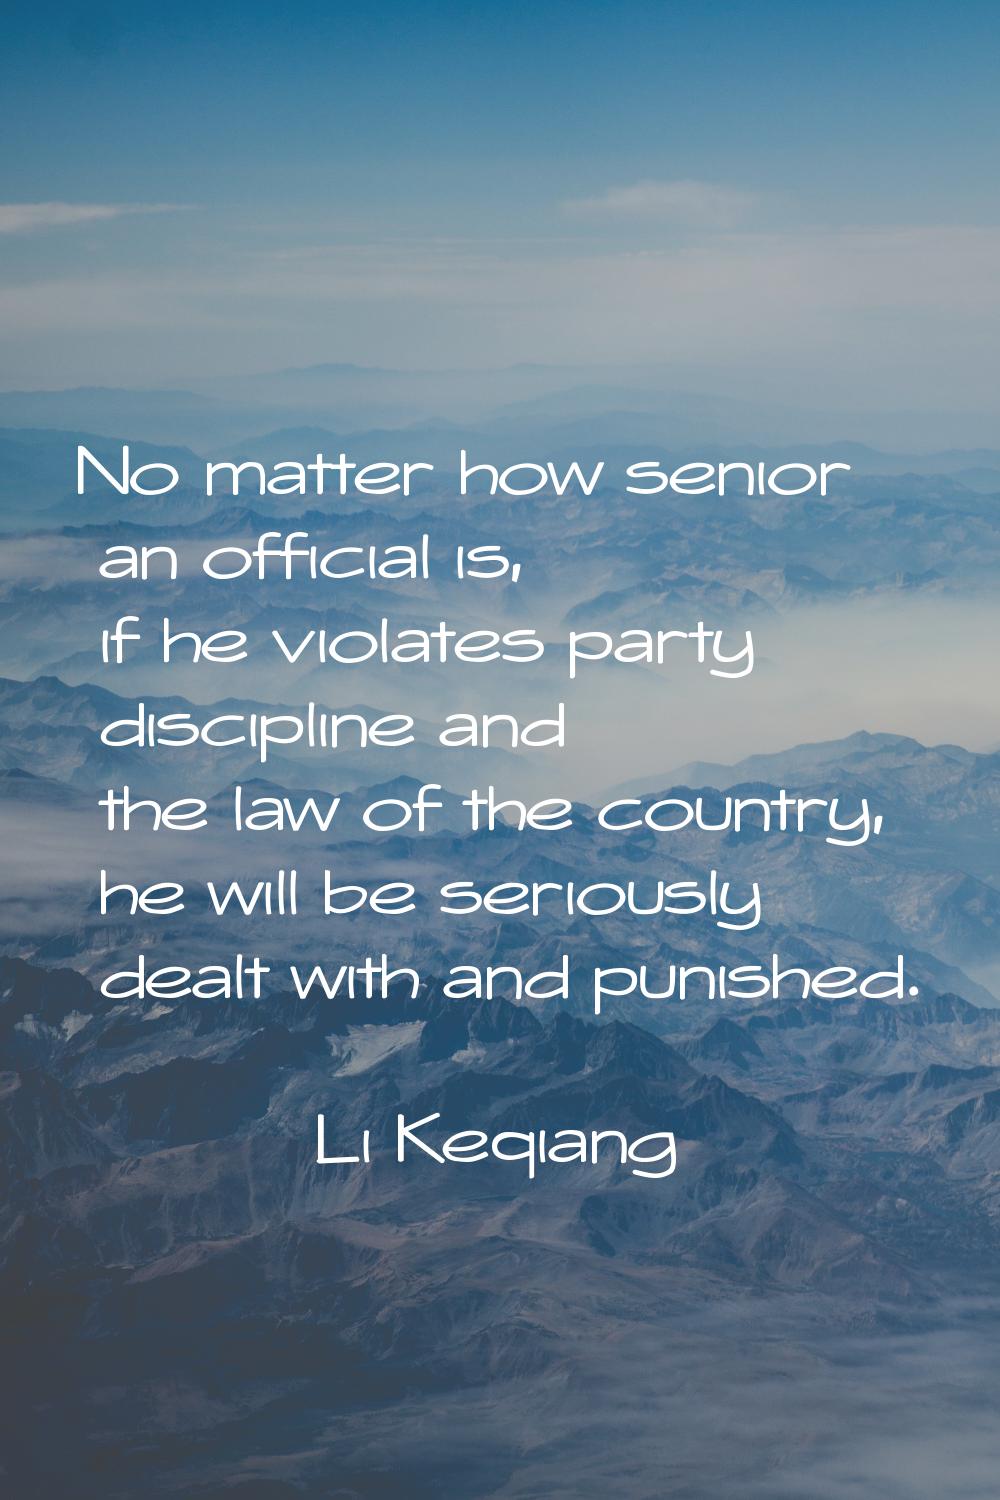 No matter how senior an official is, if he violates party discipline and the law of the country, he